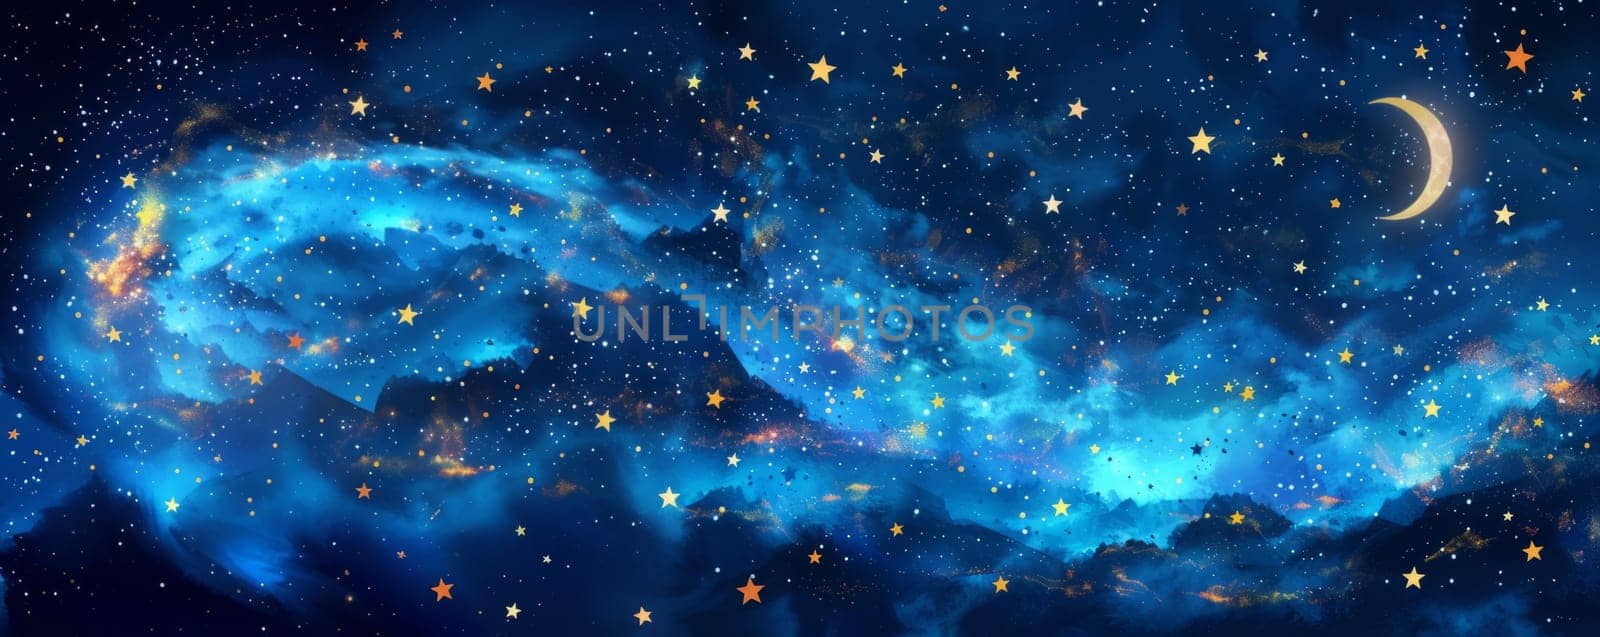 Watercolor illustration of Blue Night Sky with golden Stars and Moon. Fairy Tale Night Background Banner. by iliris